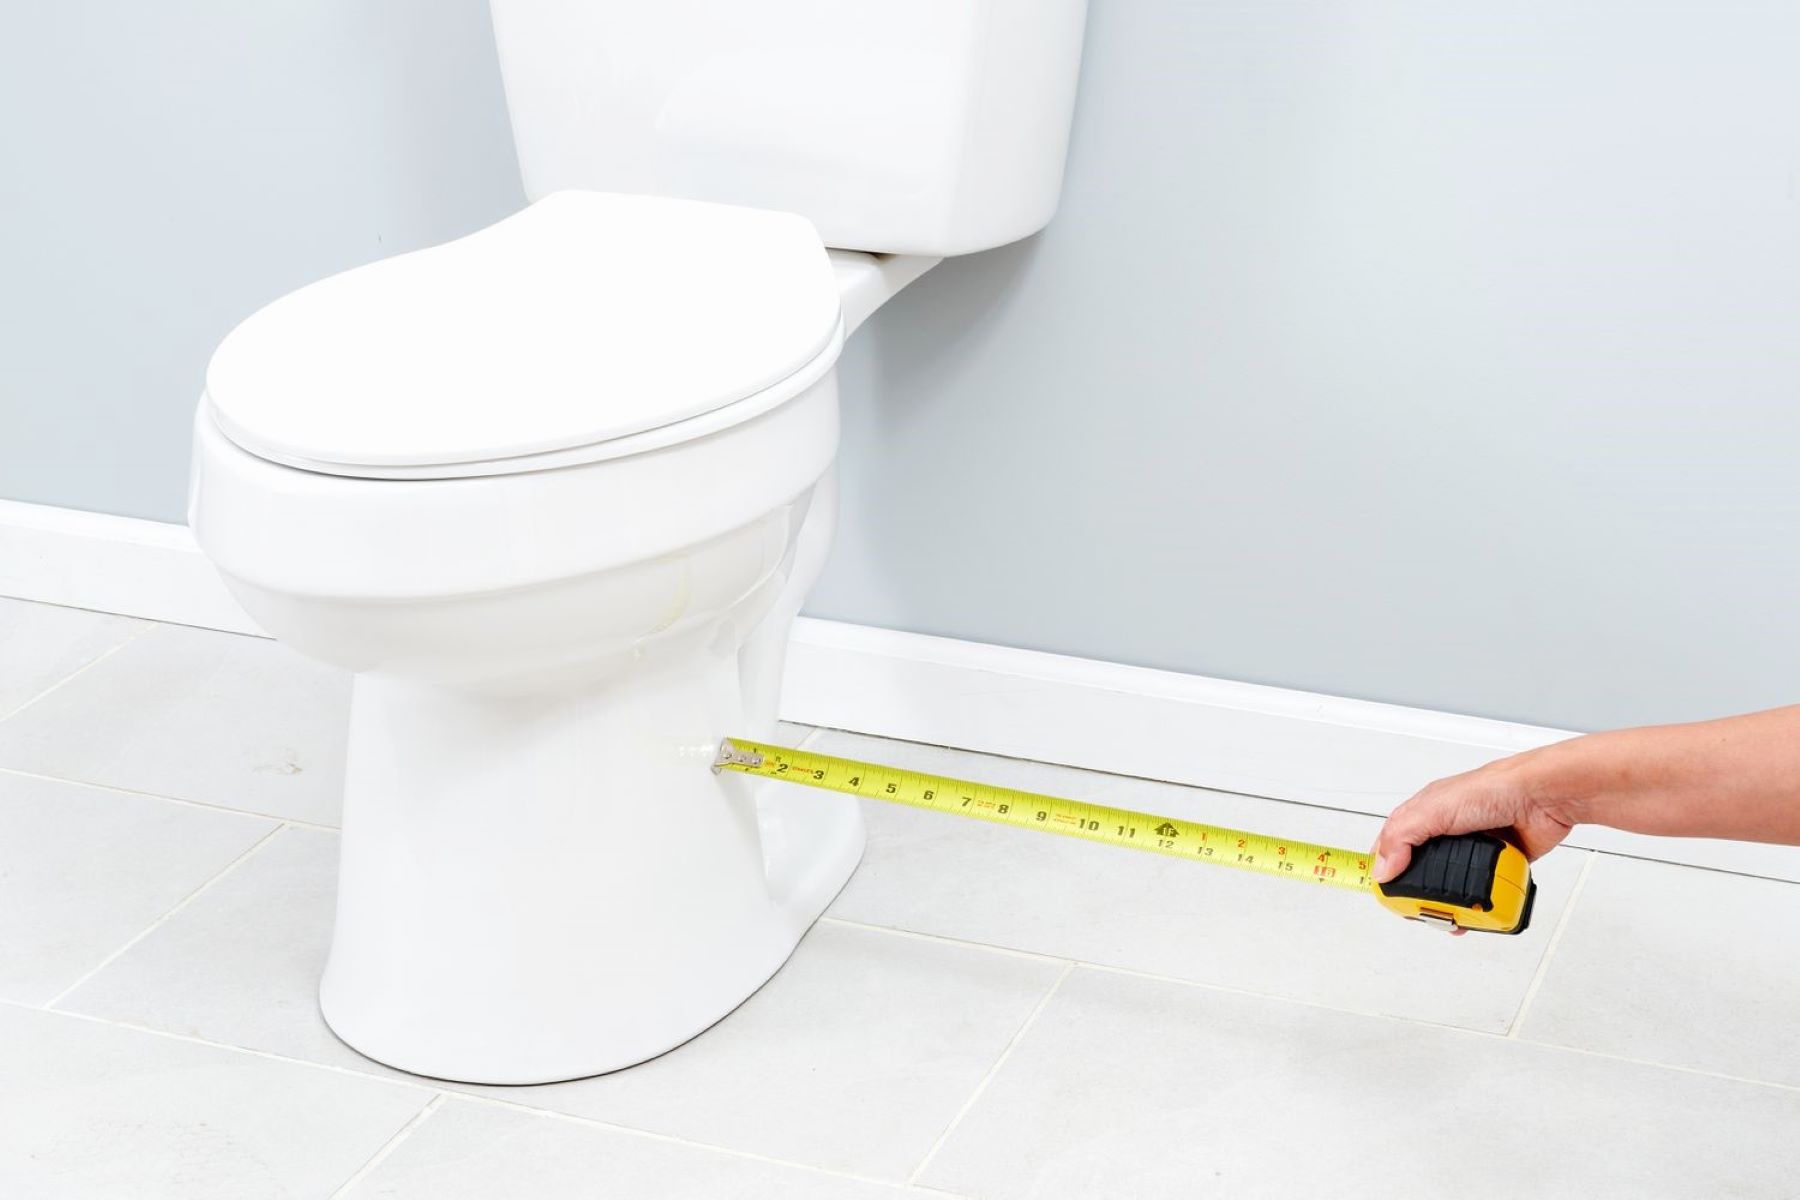 How To Add A Bidet To A Toilet